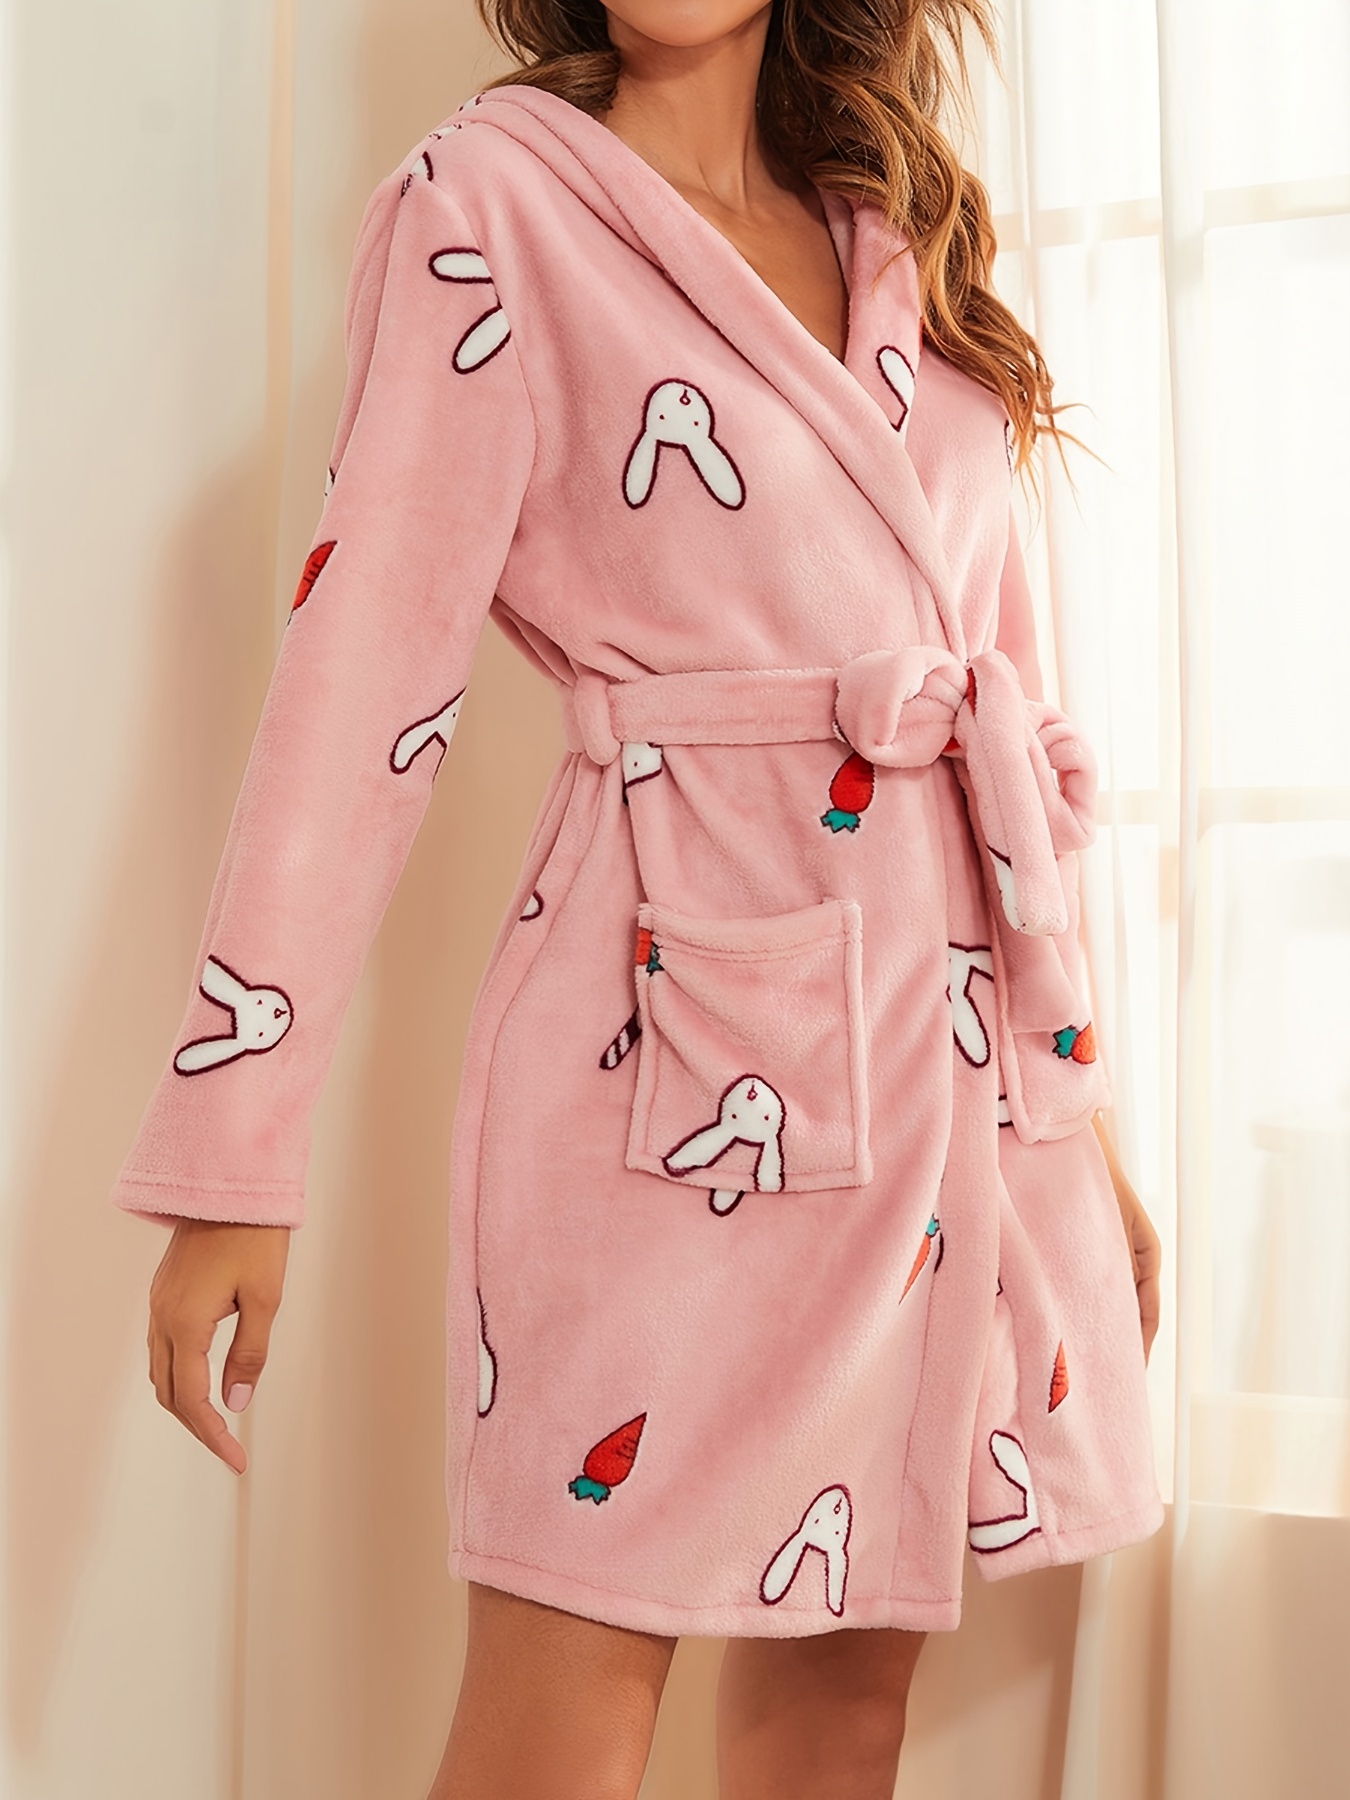 Cute Cartoon Cat Pattern House Robe, Warm & Fuzzy Hooded Lounge Robe With  Pockets, Casual Comfy Robes, Women's Sleepwear 